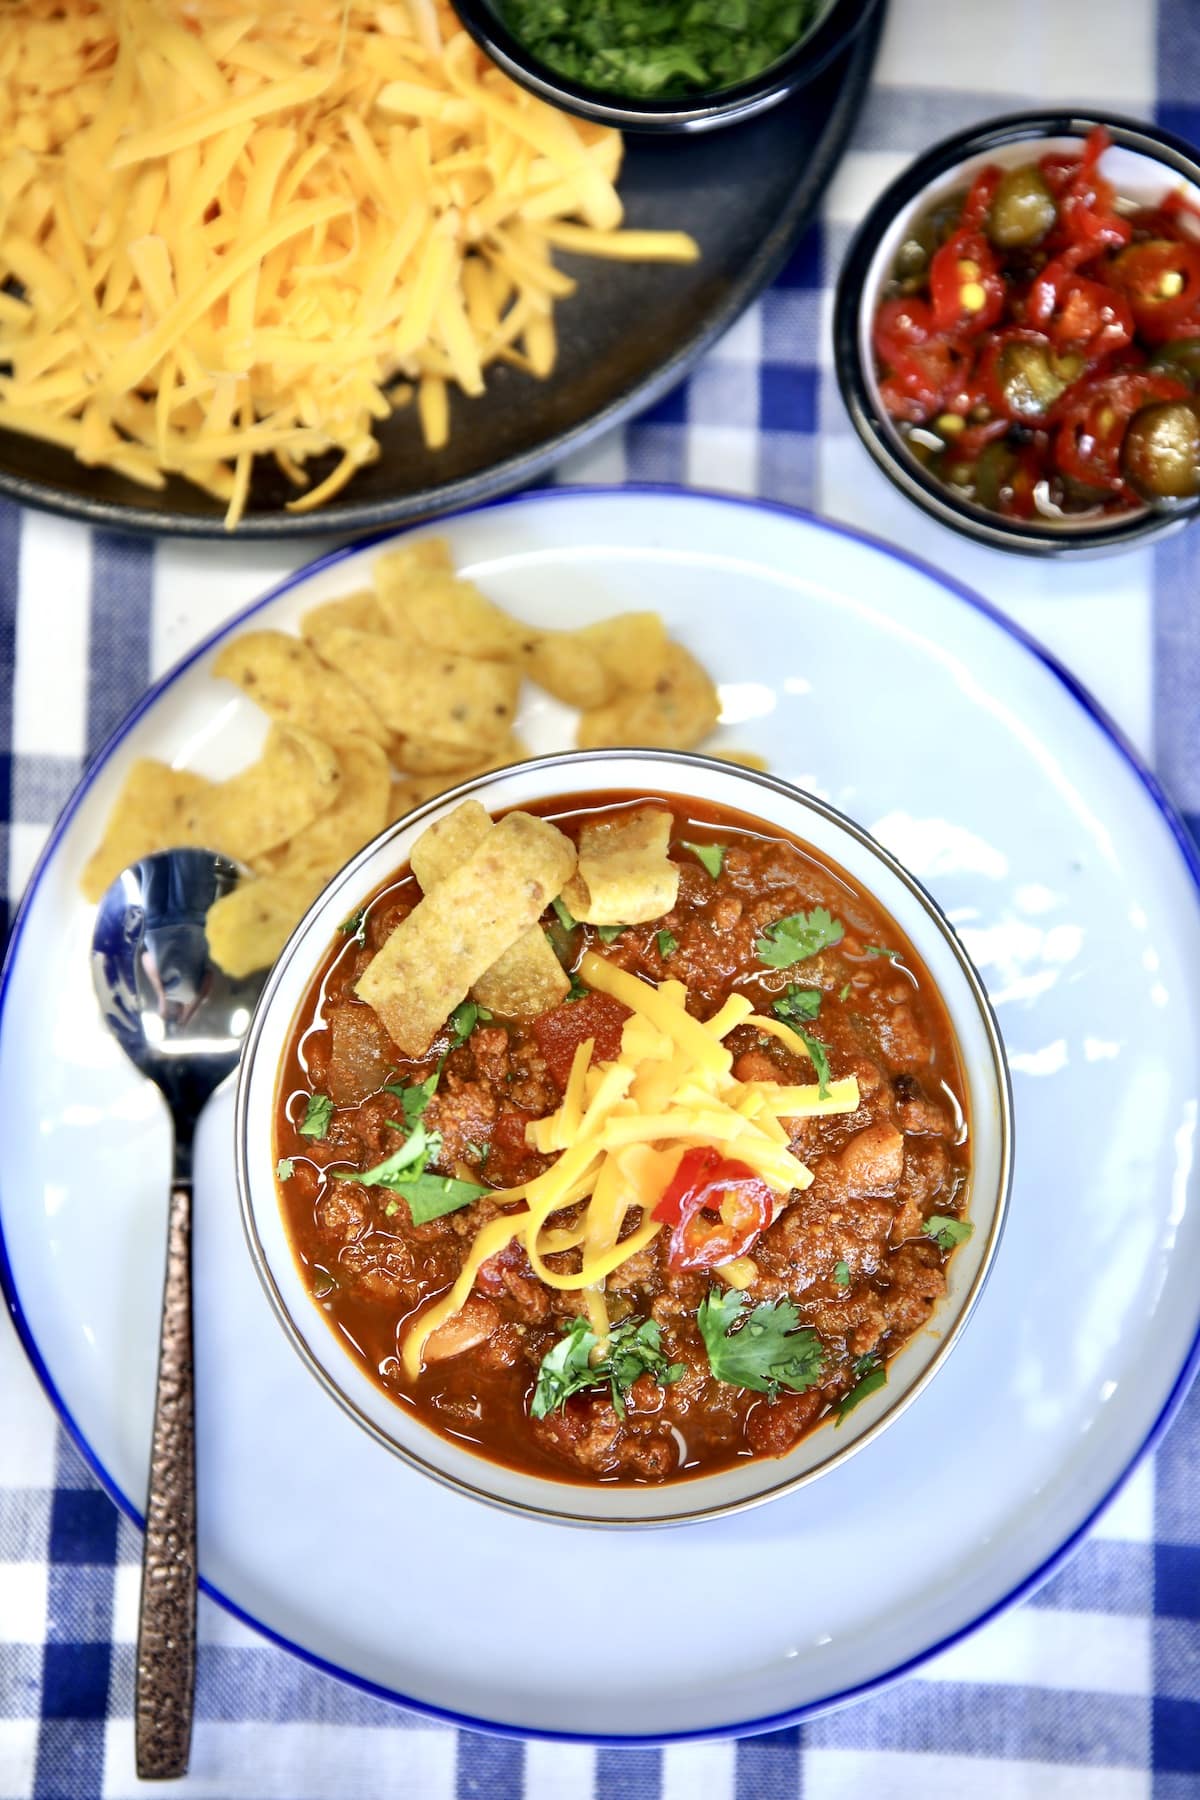 Bowl of venison chili on a plate.